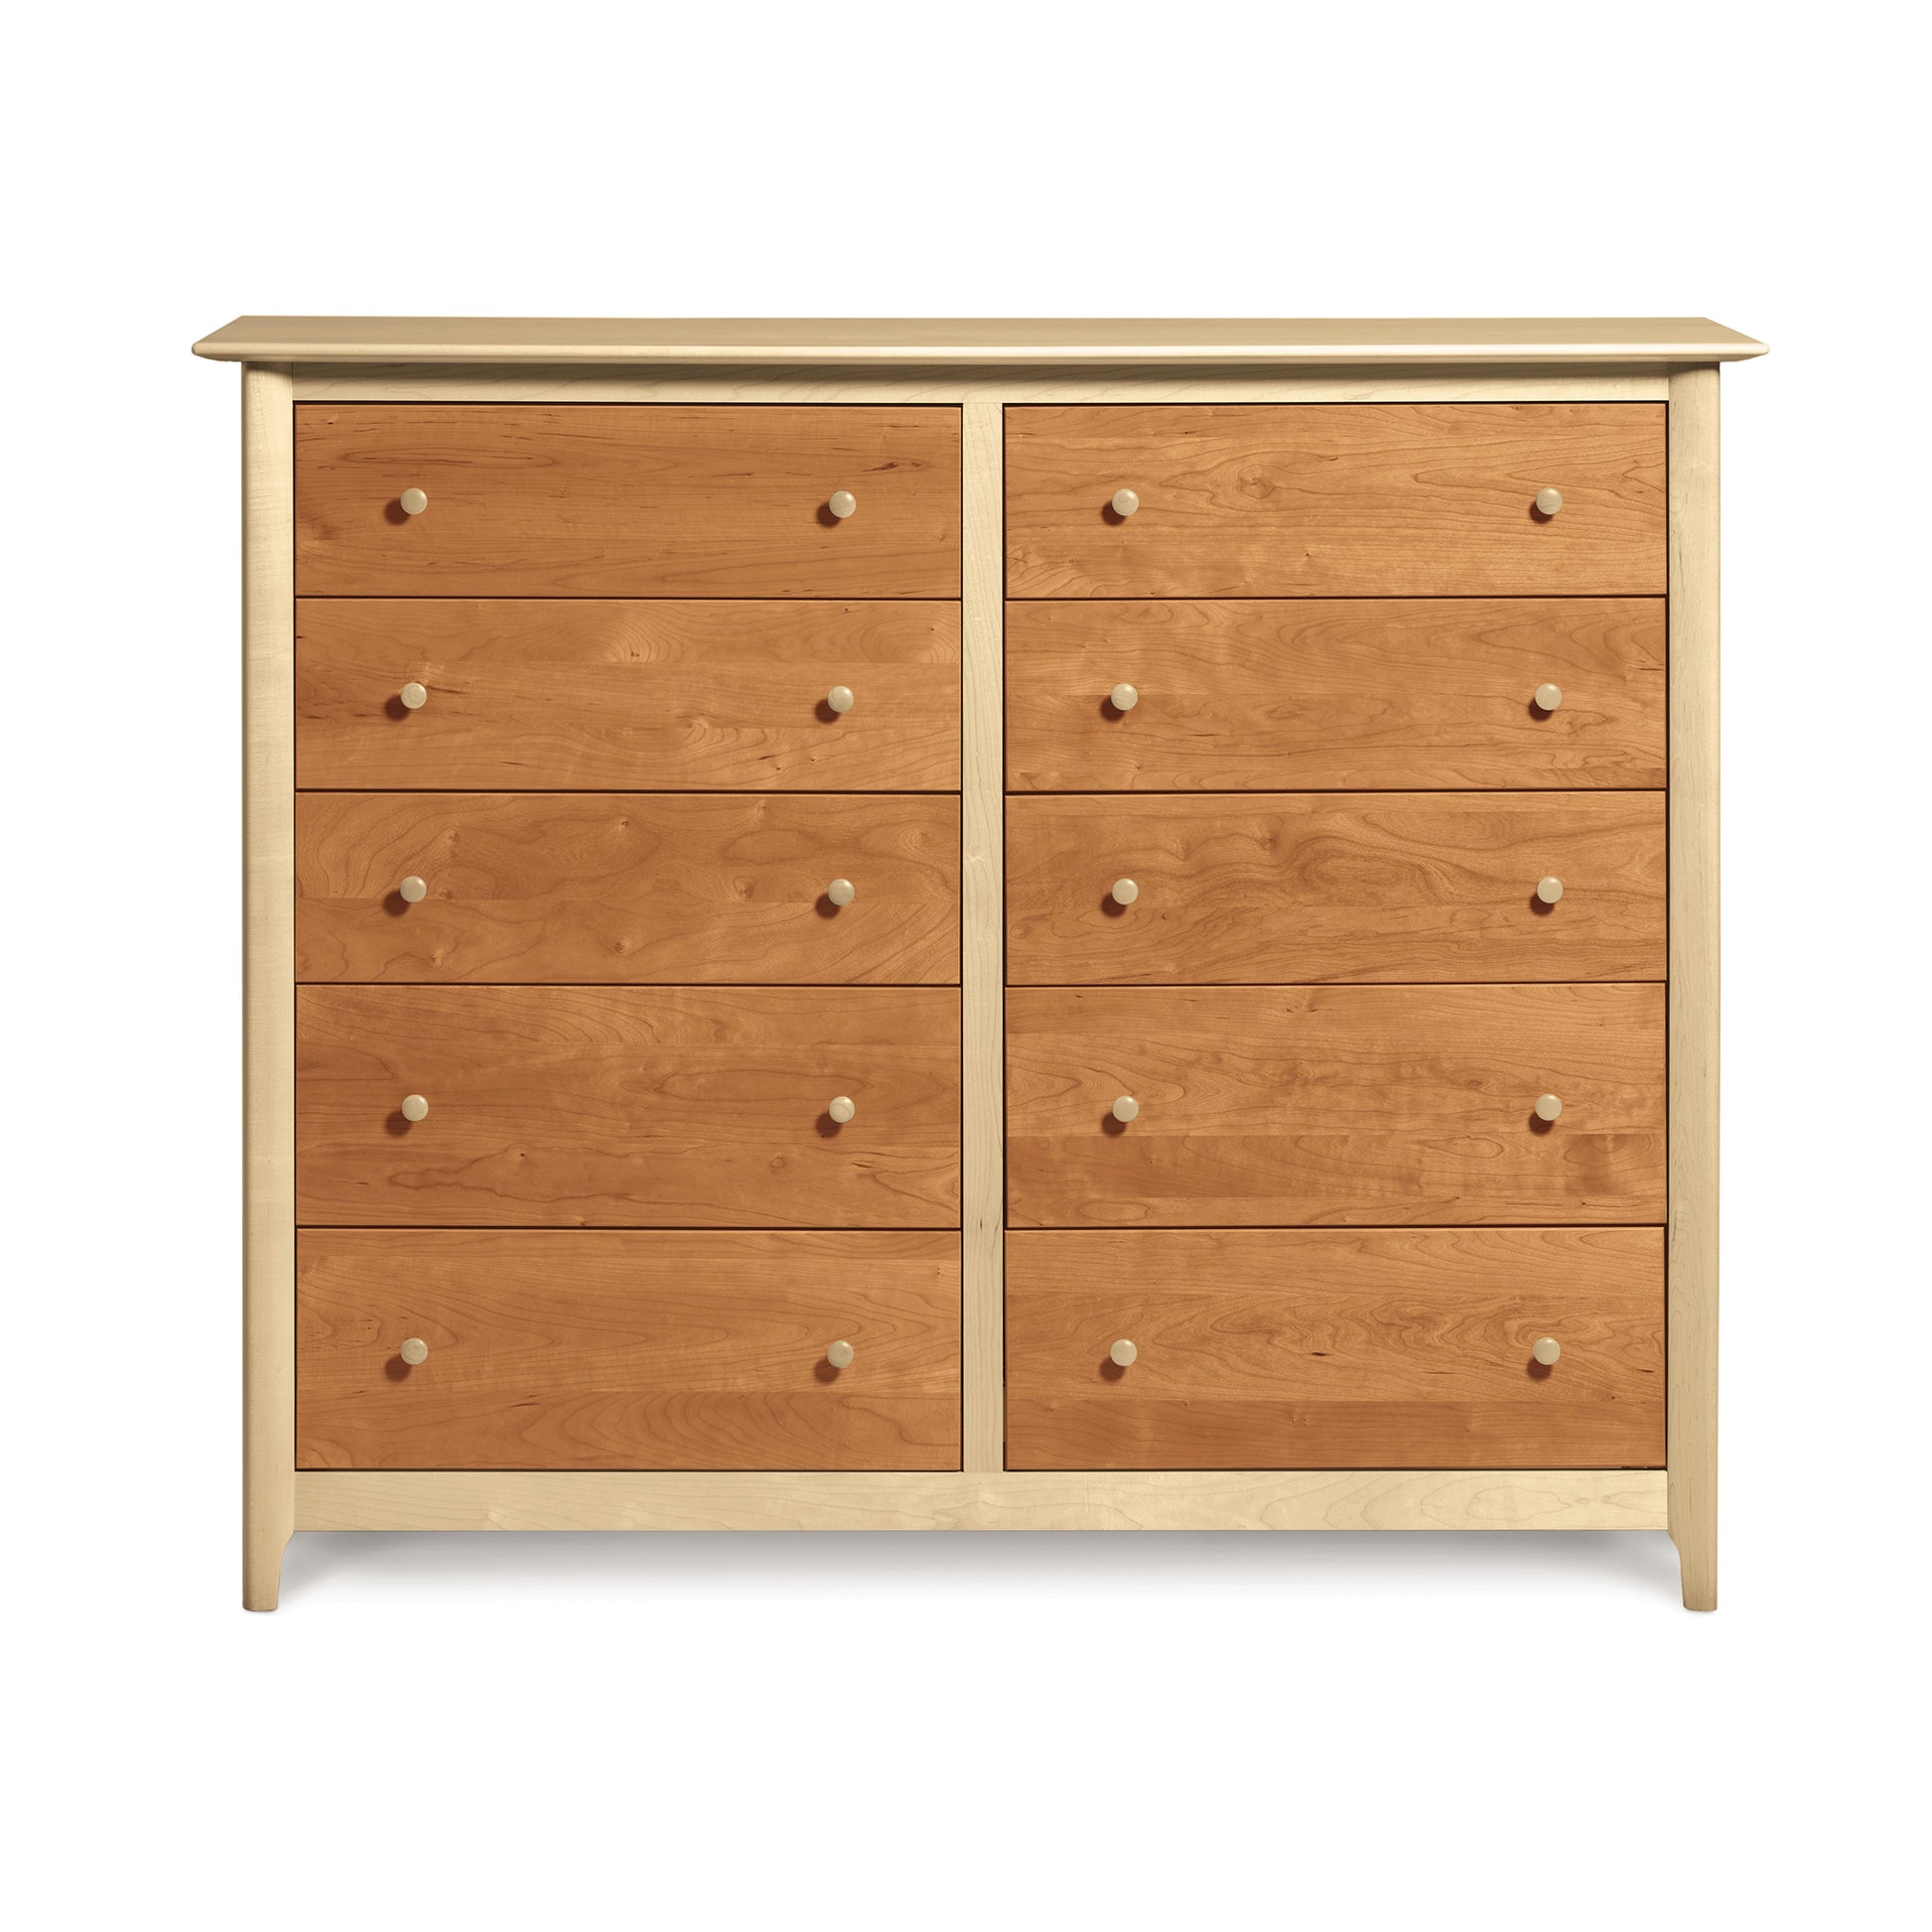 Shaker-style wooden Sarah 10-Drawer Dresser with round knobs isolated on a white background by Copeland Furniture.